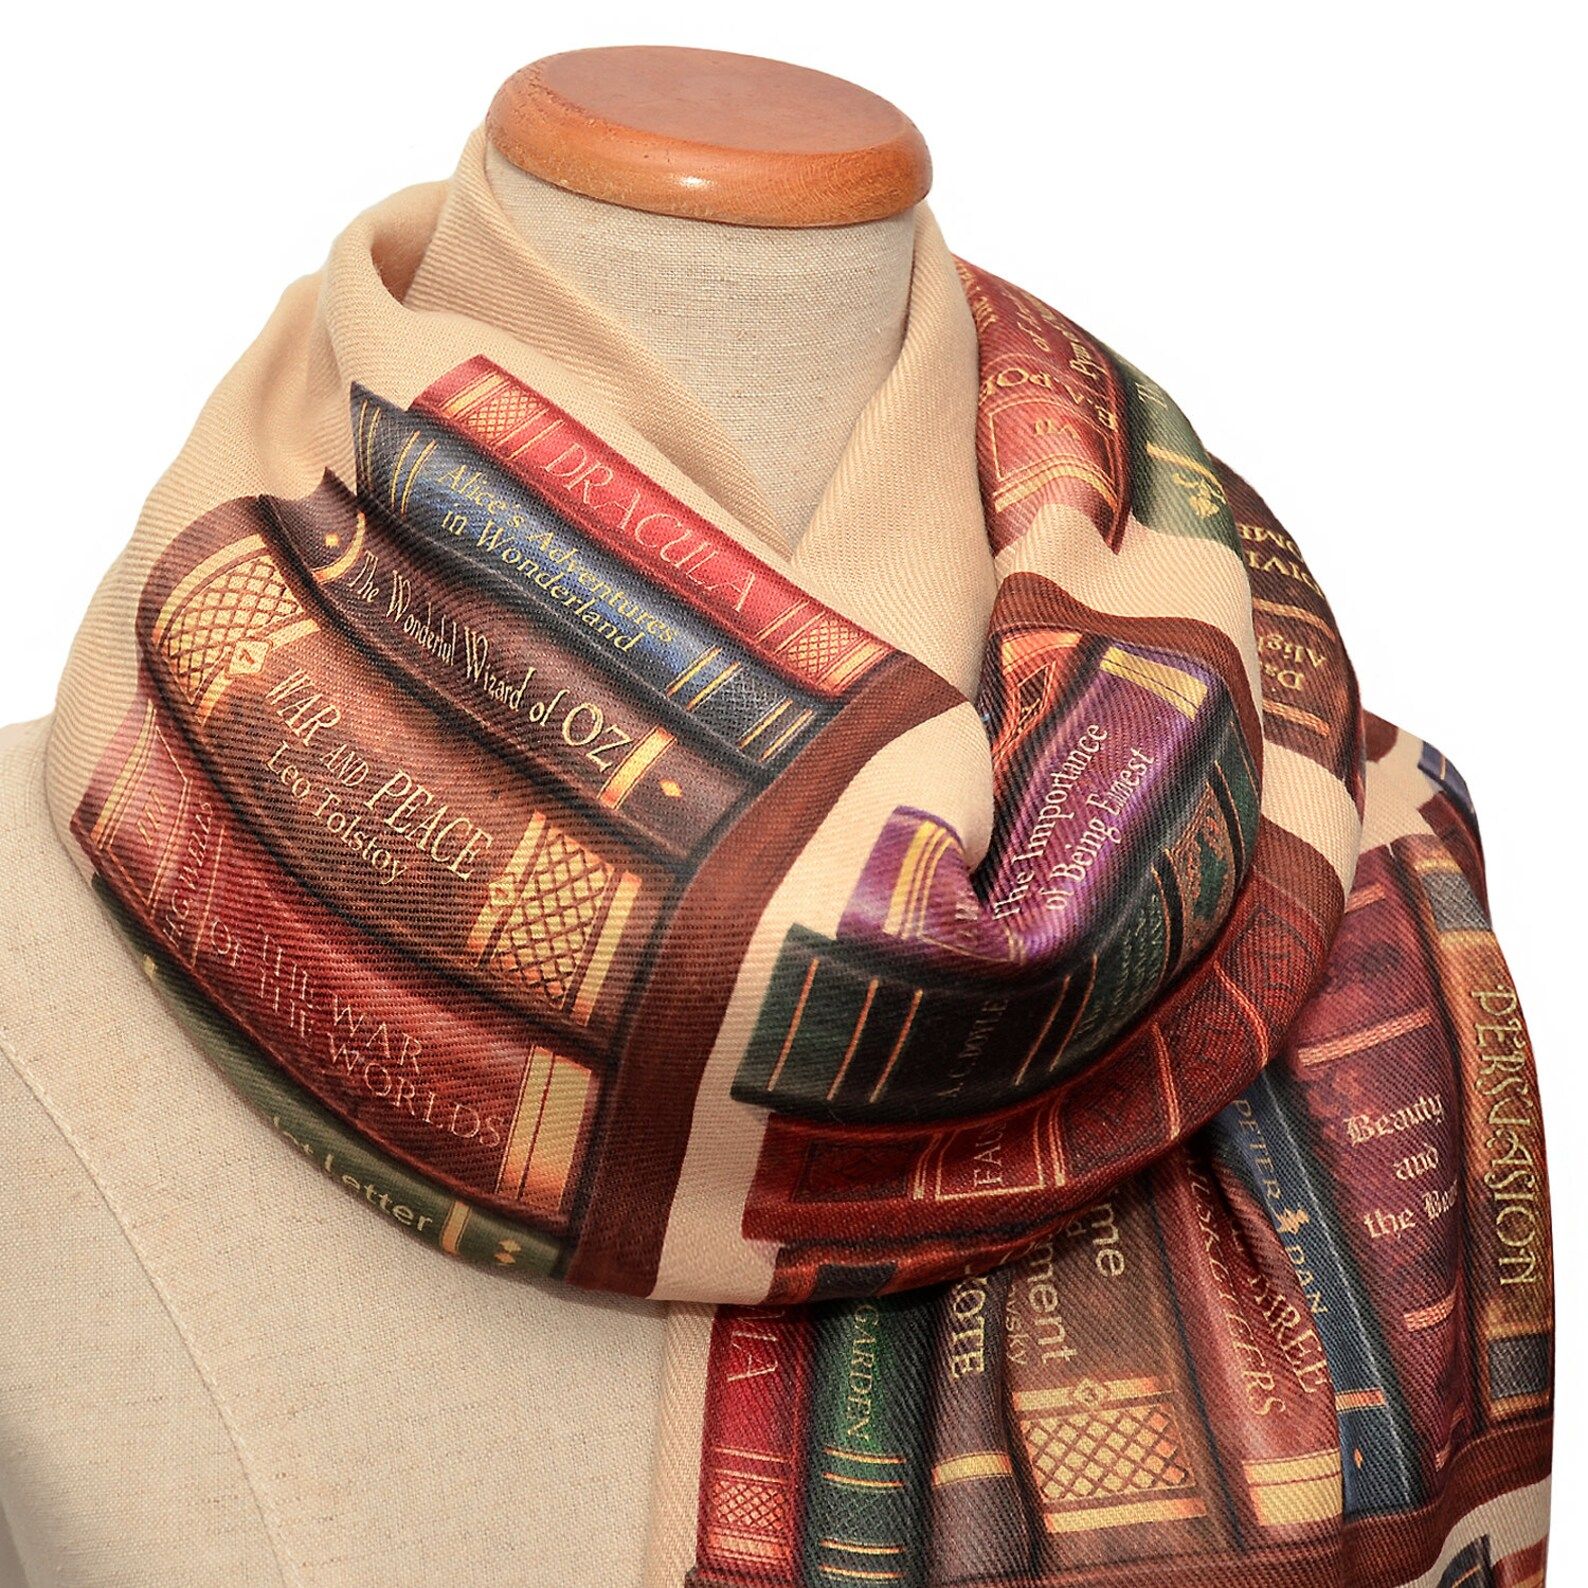 Picture of scarf with book shelves